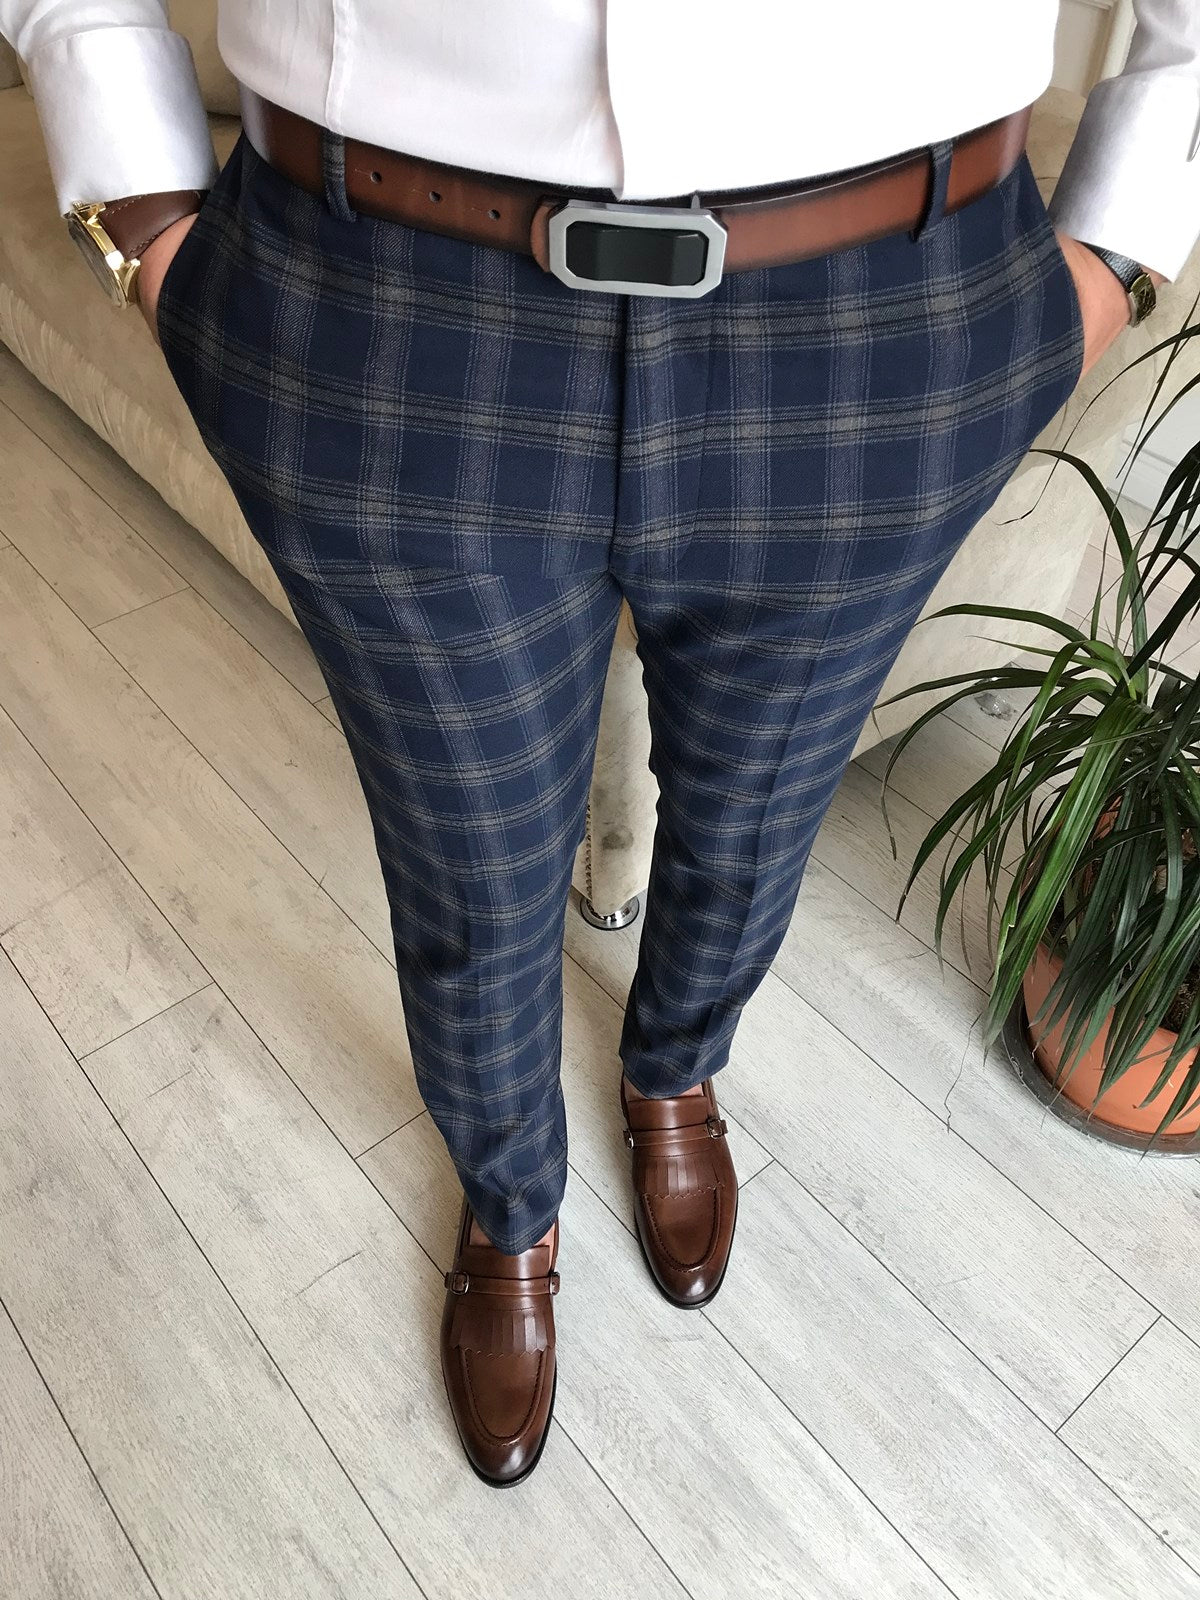 Blue Plaid Trews Pants With Free Multitool  Delivery  Plaid Tartan  Designed in Scotland By Royal  Awesome